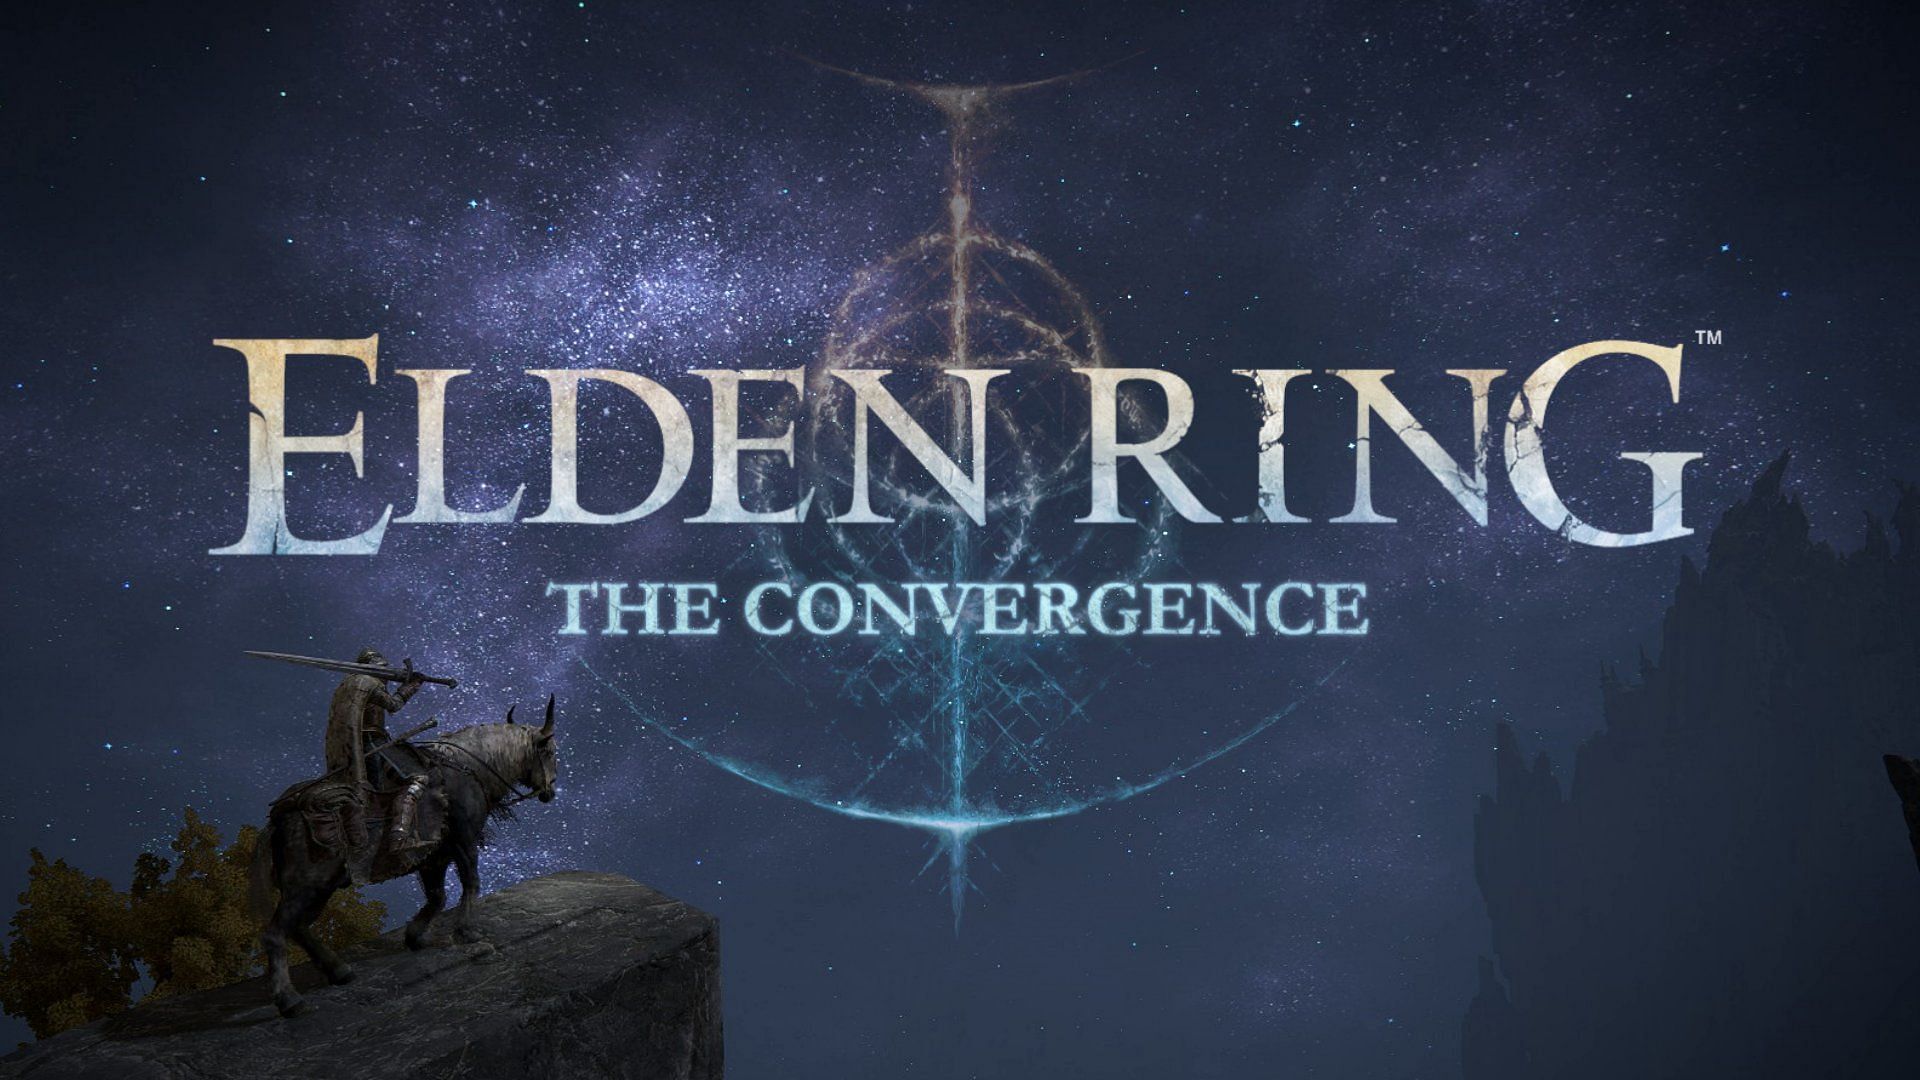 Go adventuring with your favorite Elden Ring NPCs and Bosses with this mod